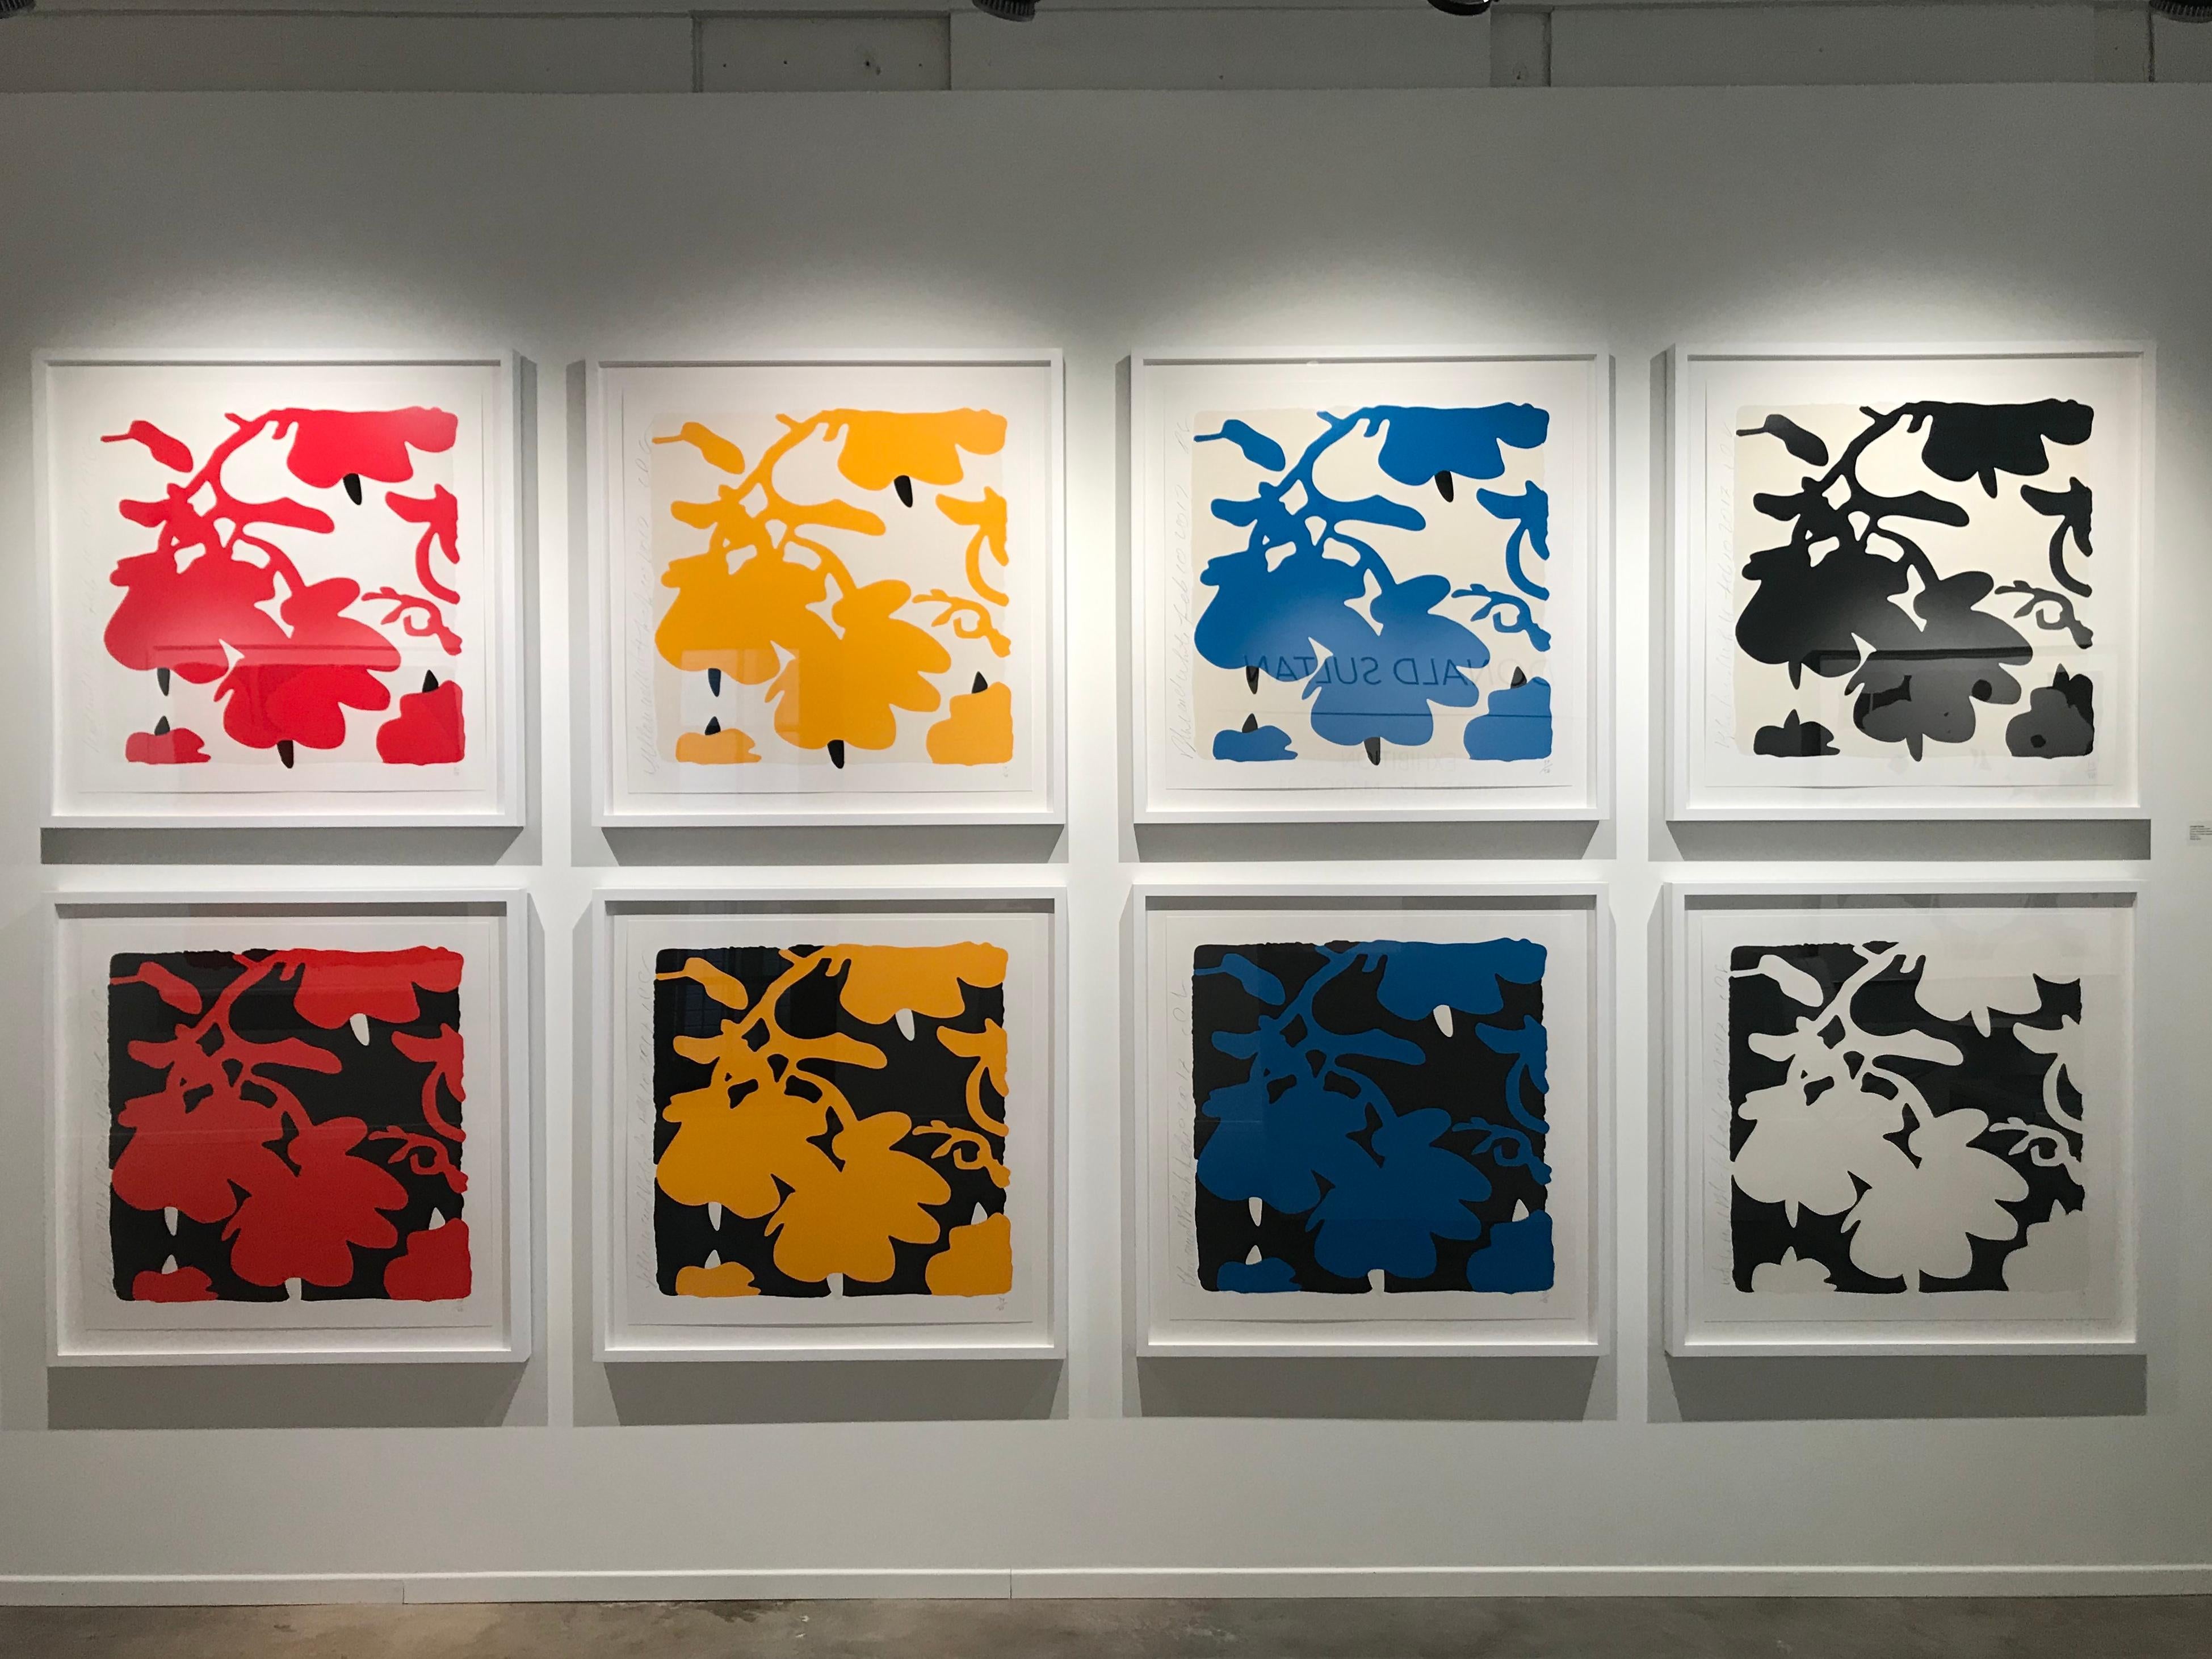 Donald Sultan (Born 1951)
Lantern Flowers (White and Black), 2017
Color silkscreen with enamel inks and tar-like texture on 2-ply museum board
32 x 32 in.
Edition 34 of 50
Signed by artist
Framed in white gallery frame with glass
